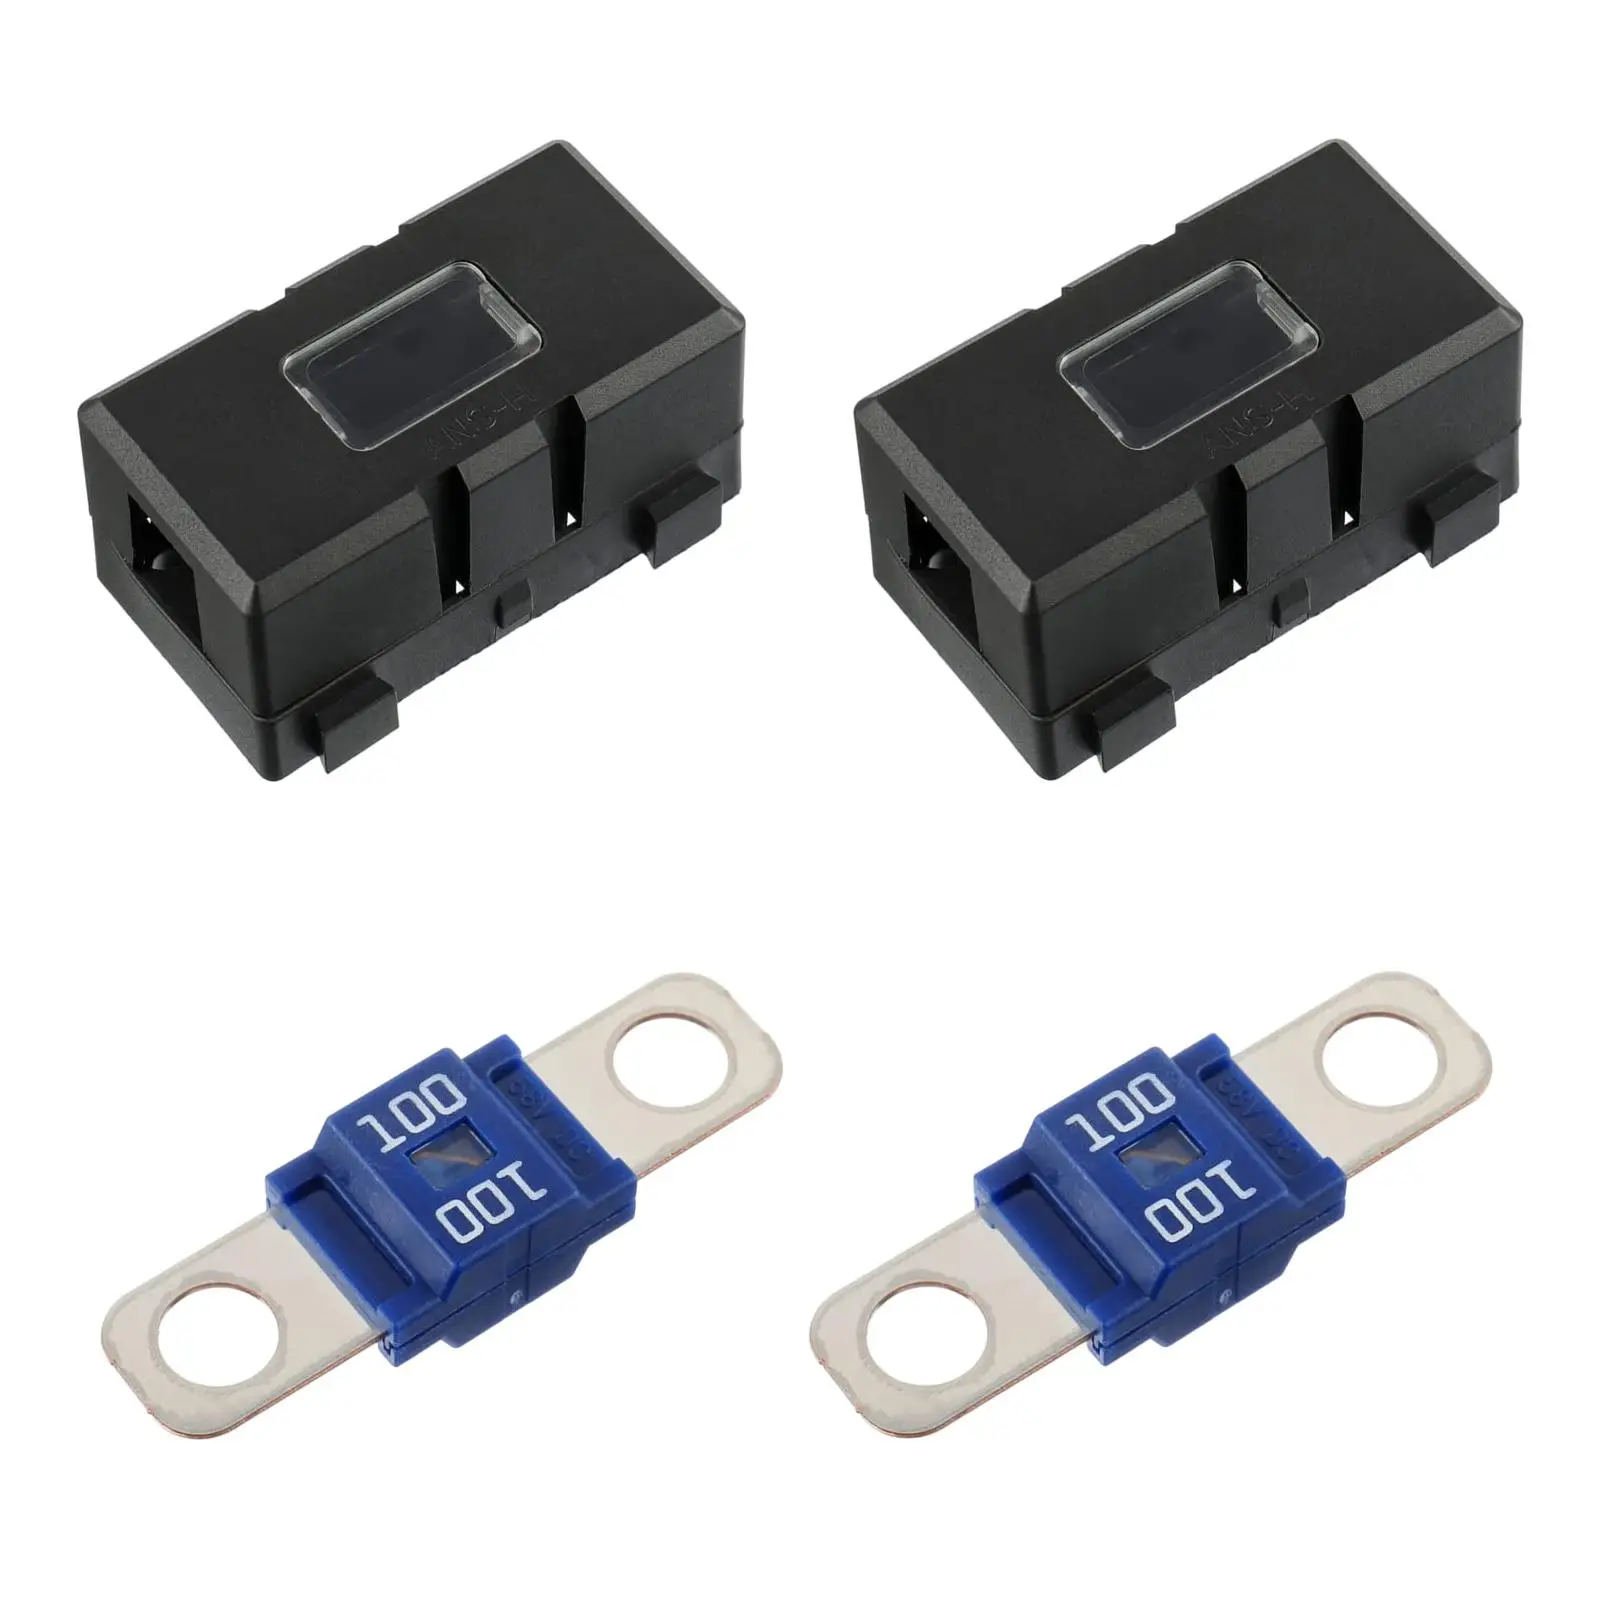 Multifunctional Car Fuse Holder with 2Pcs Fuses Waterproof for Trucks